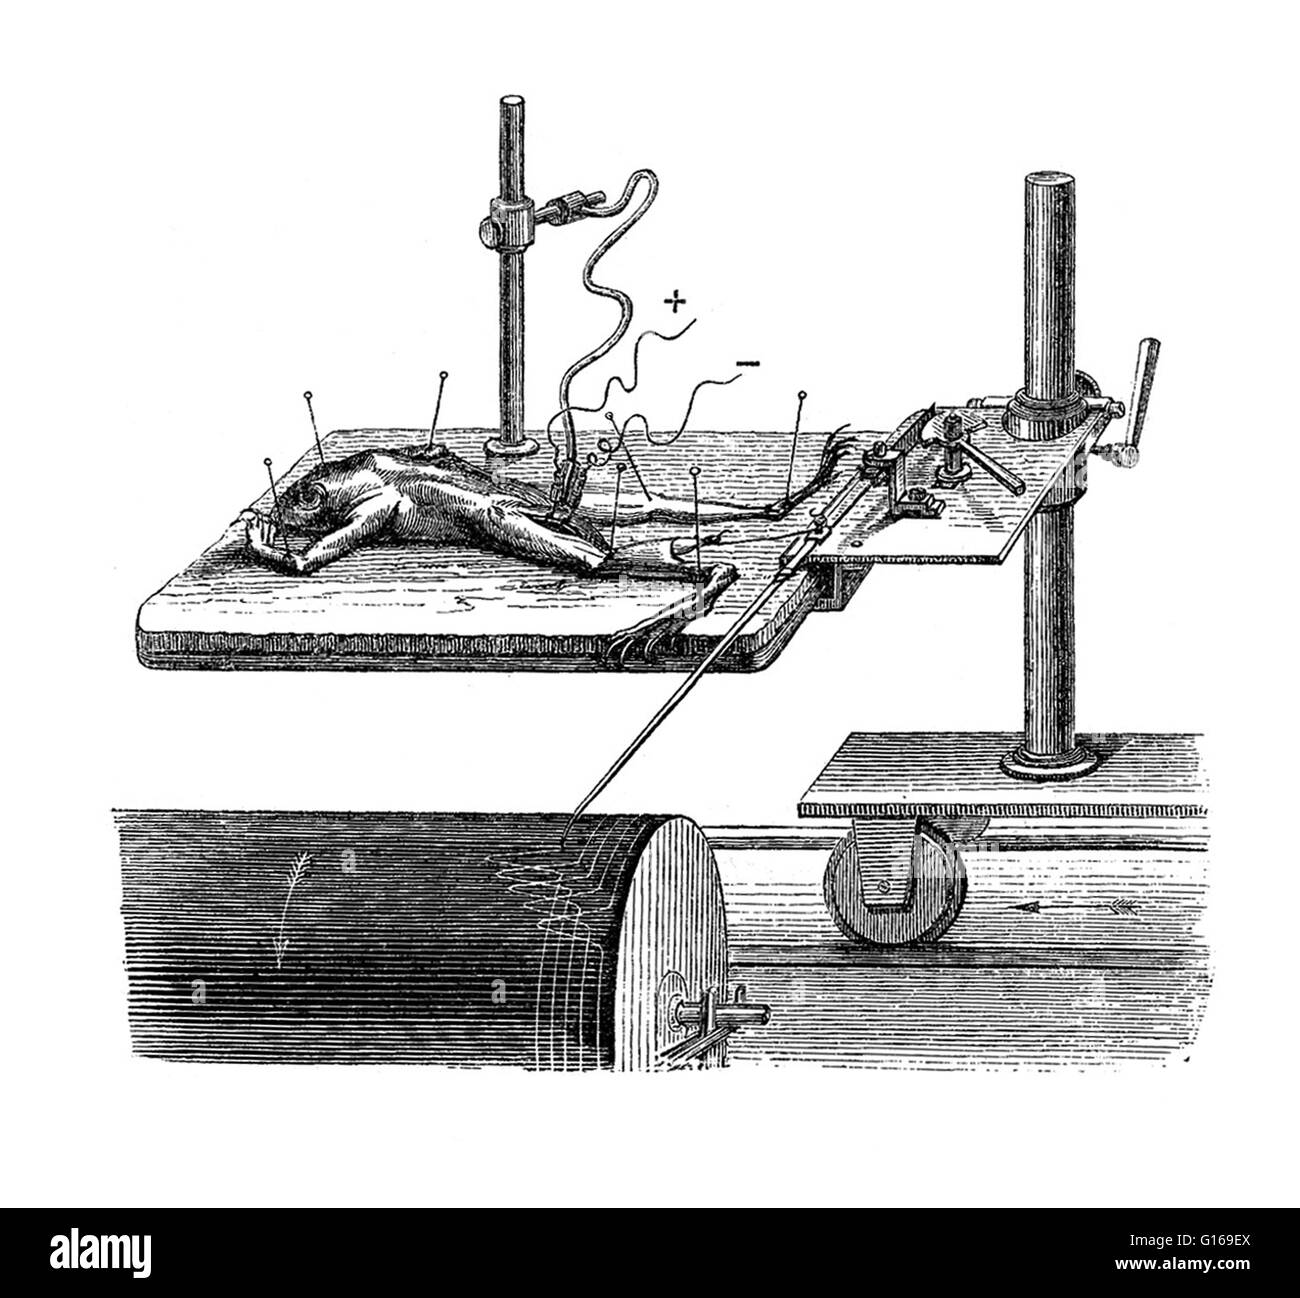 The Animal Machine, Marey's Myograph, 1873. Best known for his key participation in the development of chronophotography, French scientist Étienne Jules-Marey is also credited for perfecting Hermann von Helmholtz's myograph. A myograph is a device capable Stock Photo